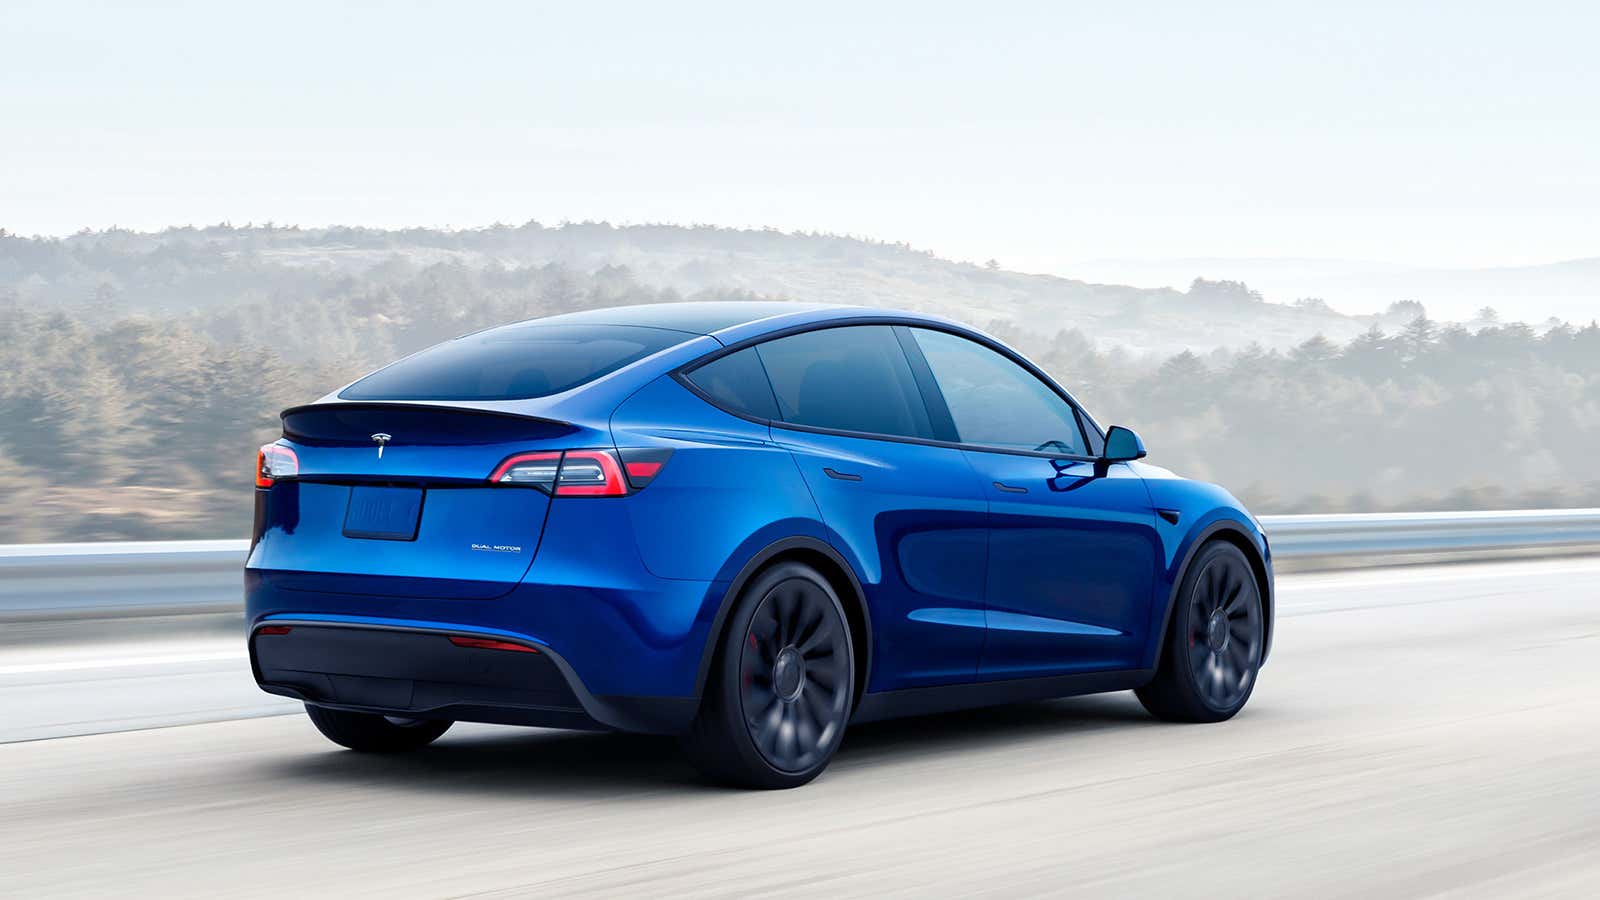 Porsche Now Sells Two Taycans For Every Model S That Tesla Ships